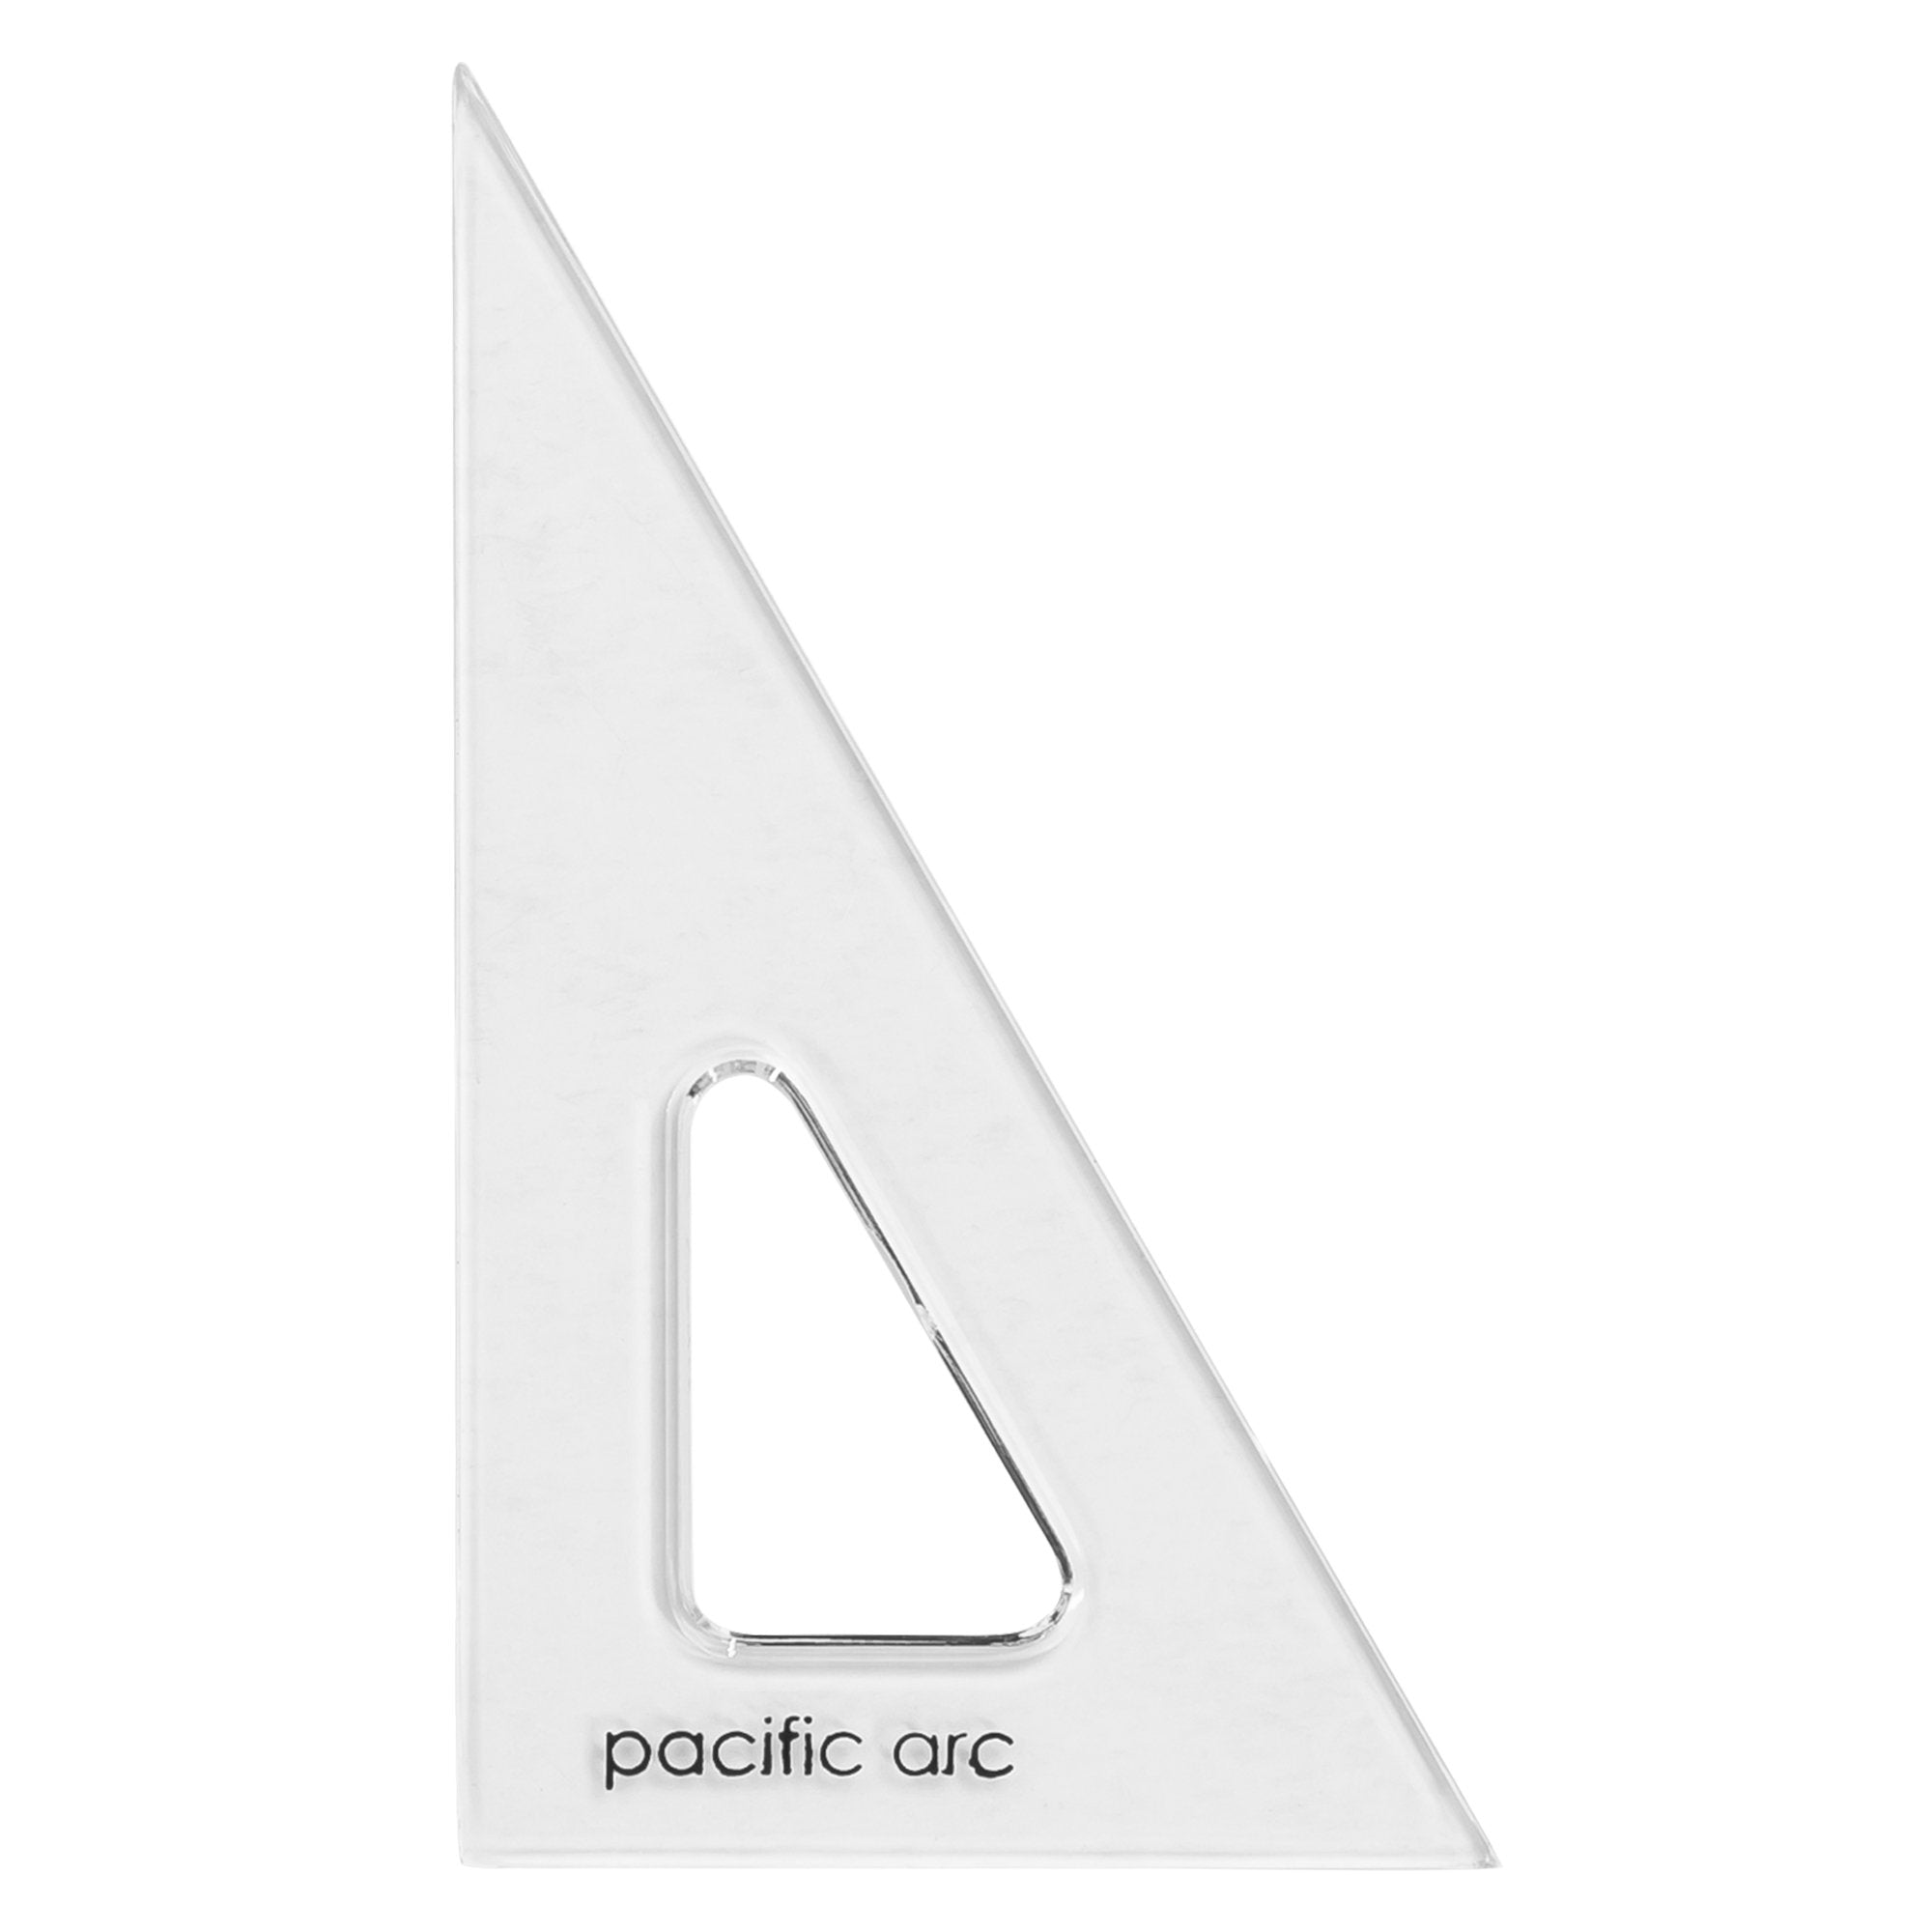 Pack of 2 Large Transparent Triangle Set Square: 12 inch- 30/60 Degree & 9 inch 45/90 Degree